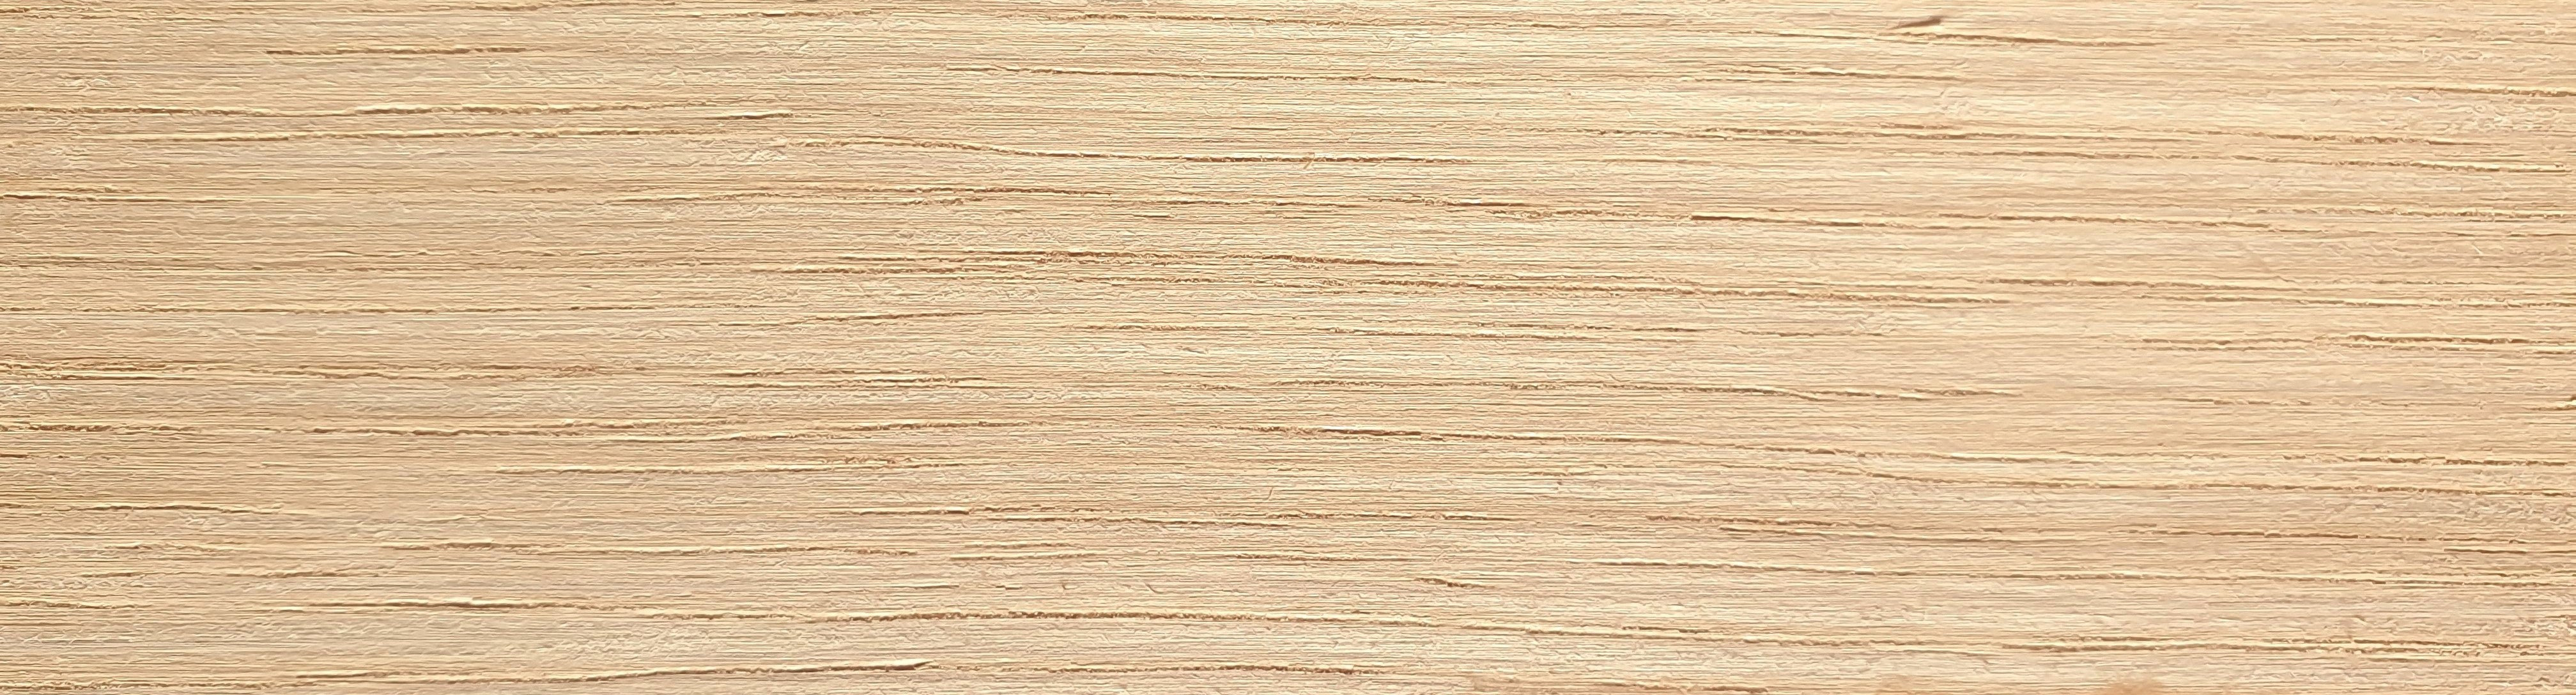 American White Oak Thickwood Unglued Edging / Lipping 50mm x 1mm Thick Oak Wood Edging